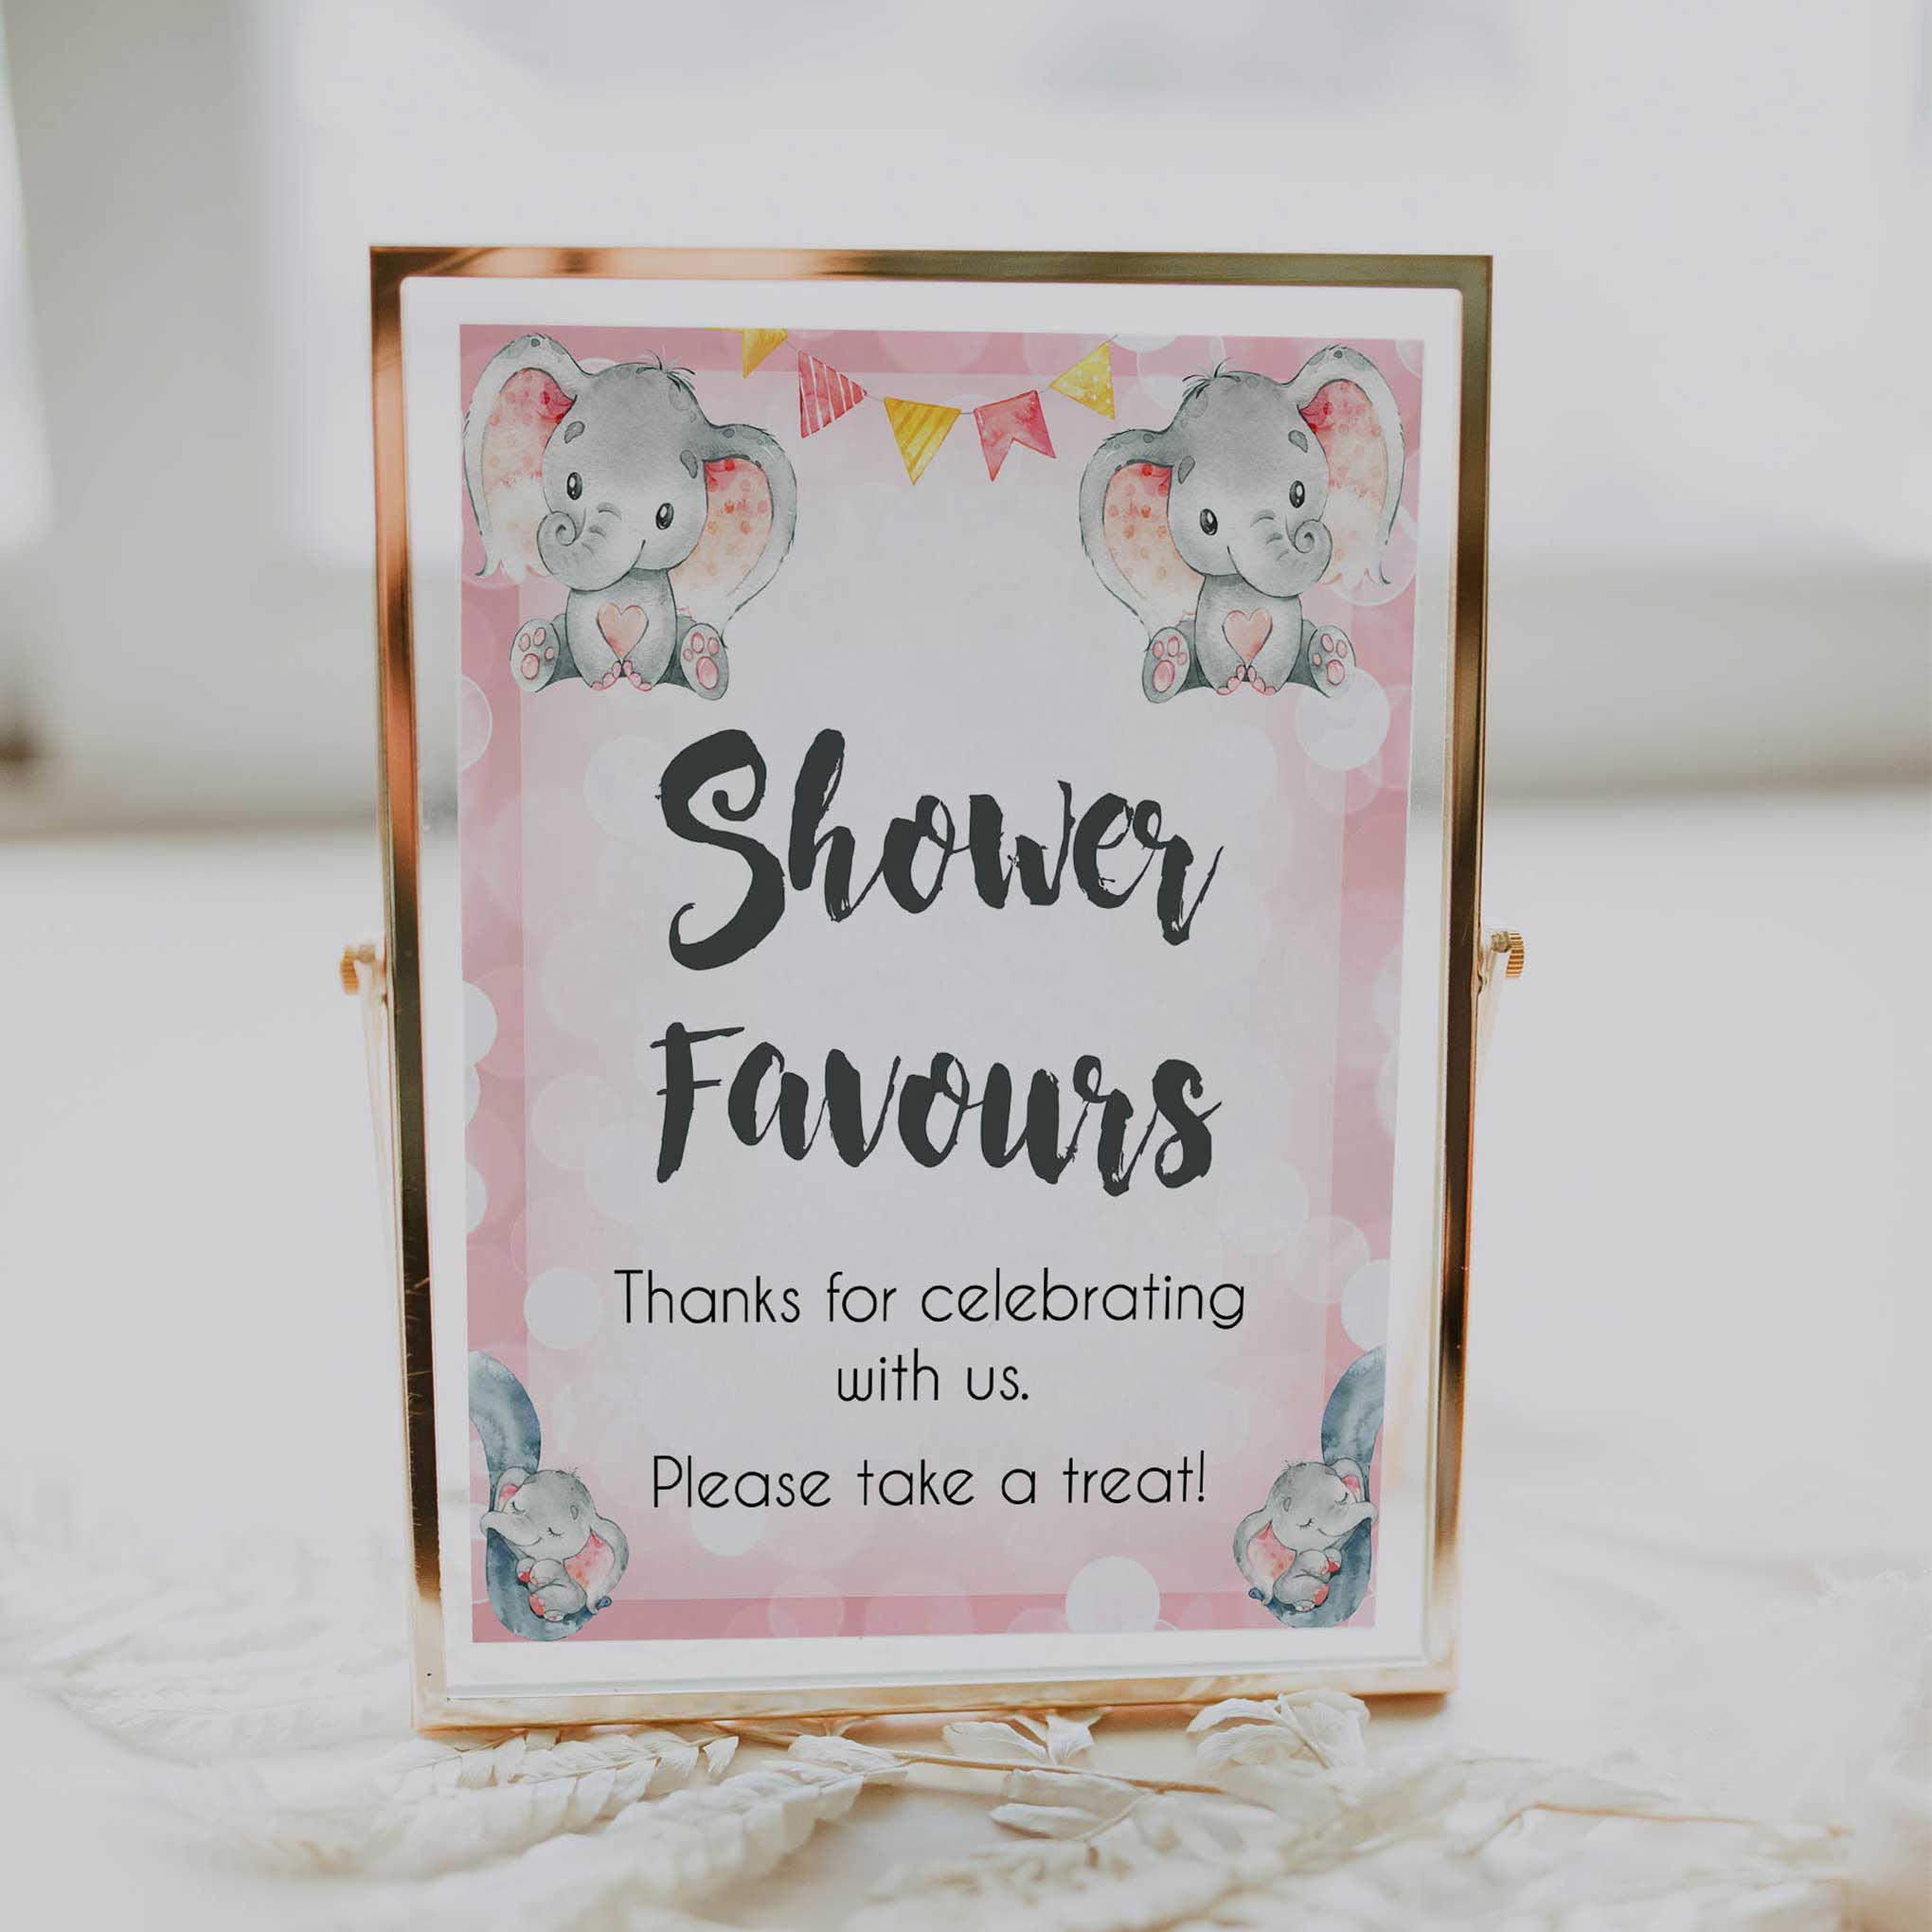 baby favors table sign, printable favors table sign, Pink elephant baby decor, printable baby table signs, printable baby decor, pink table signs, fun baby signs, fun baby table signs